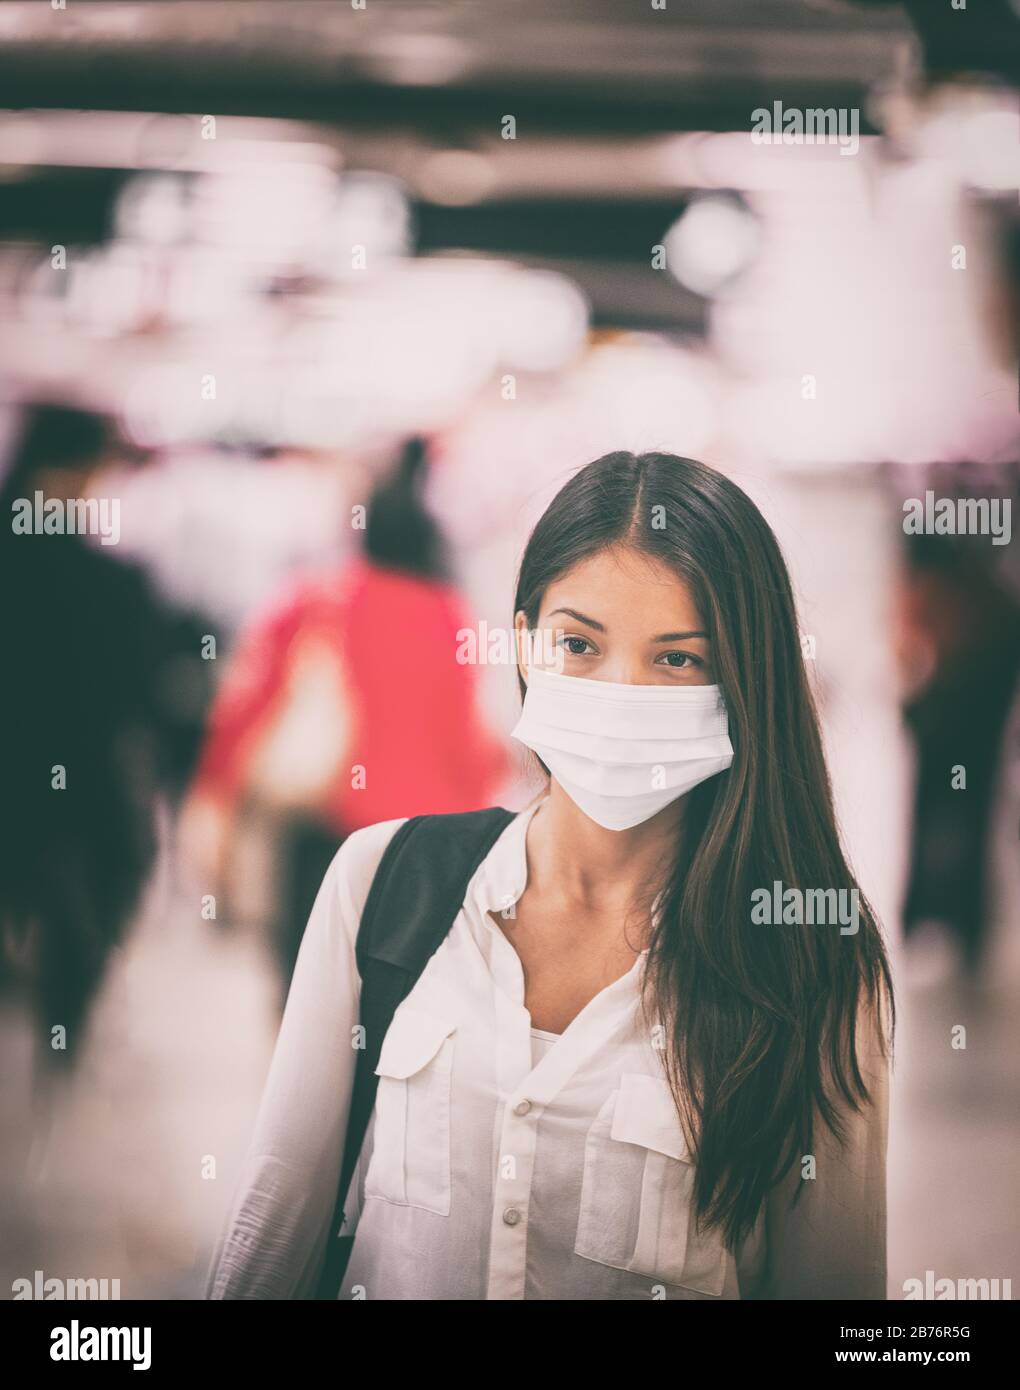 Coronavirus travel Asian woman wearing surgical face mask for virus transmission spreading prevention. Chinese girl on commute in airport flight crowded train station or public space. Stock Photo